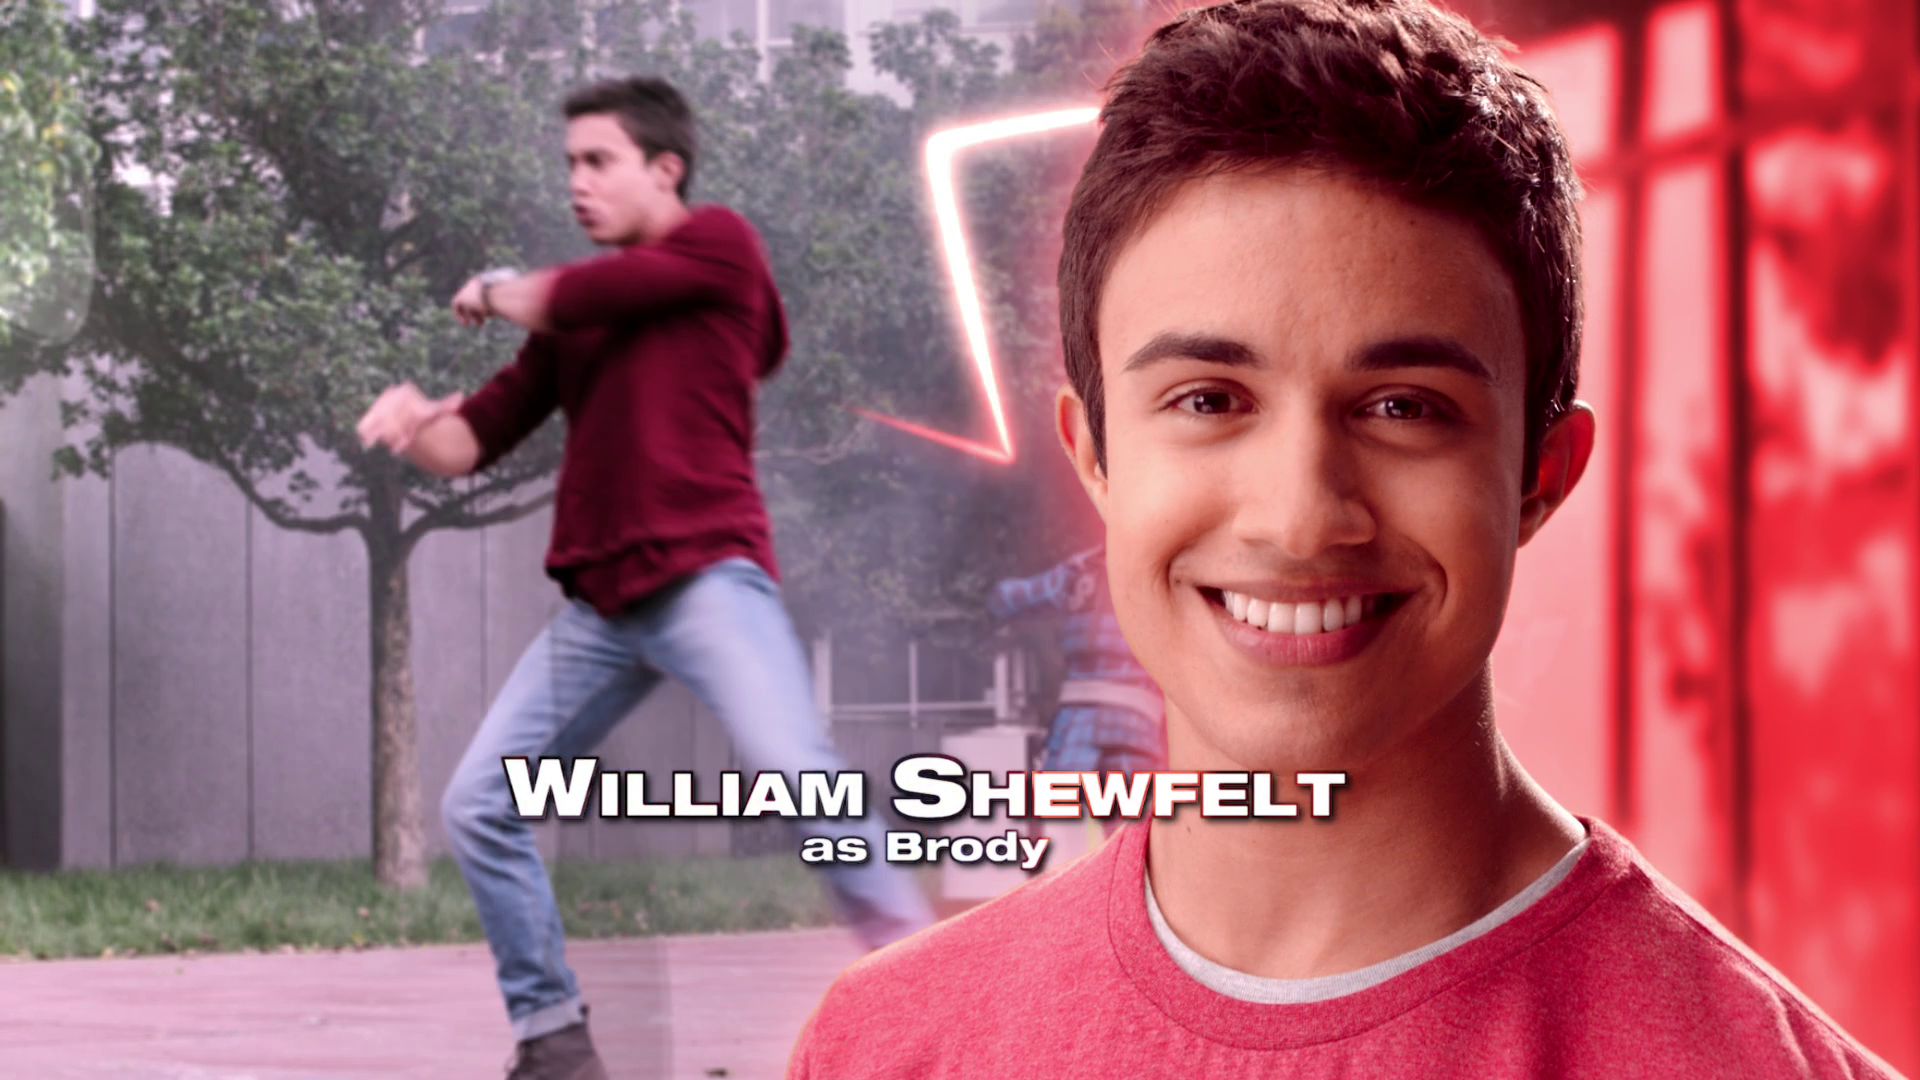 William shewfelt movies and tv shows